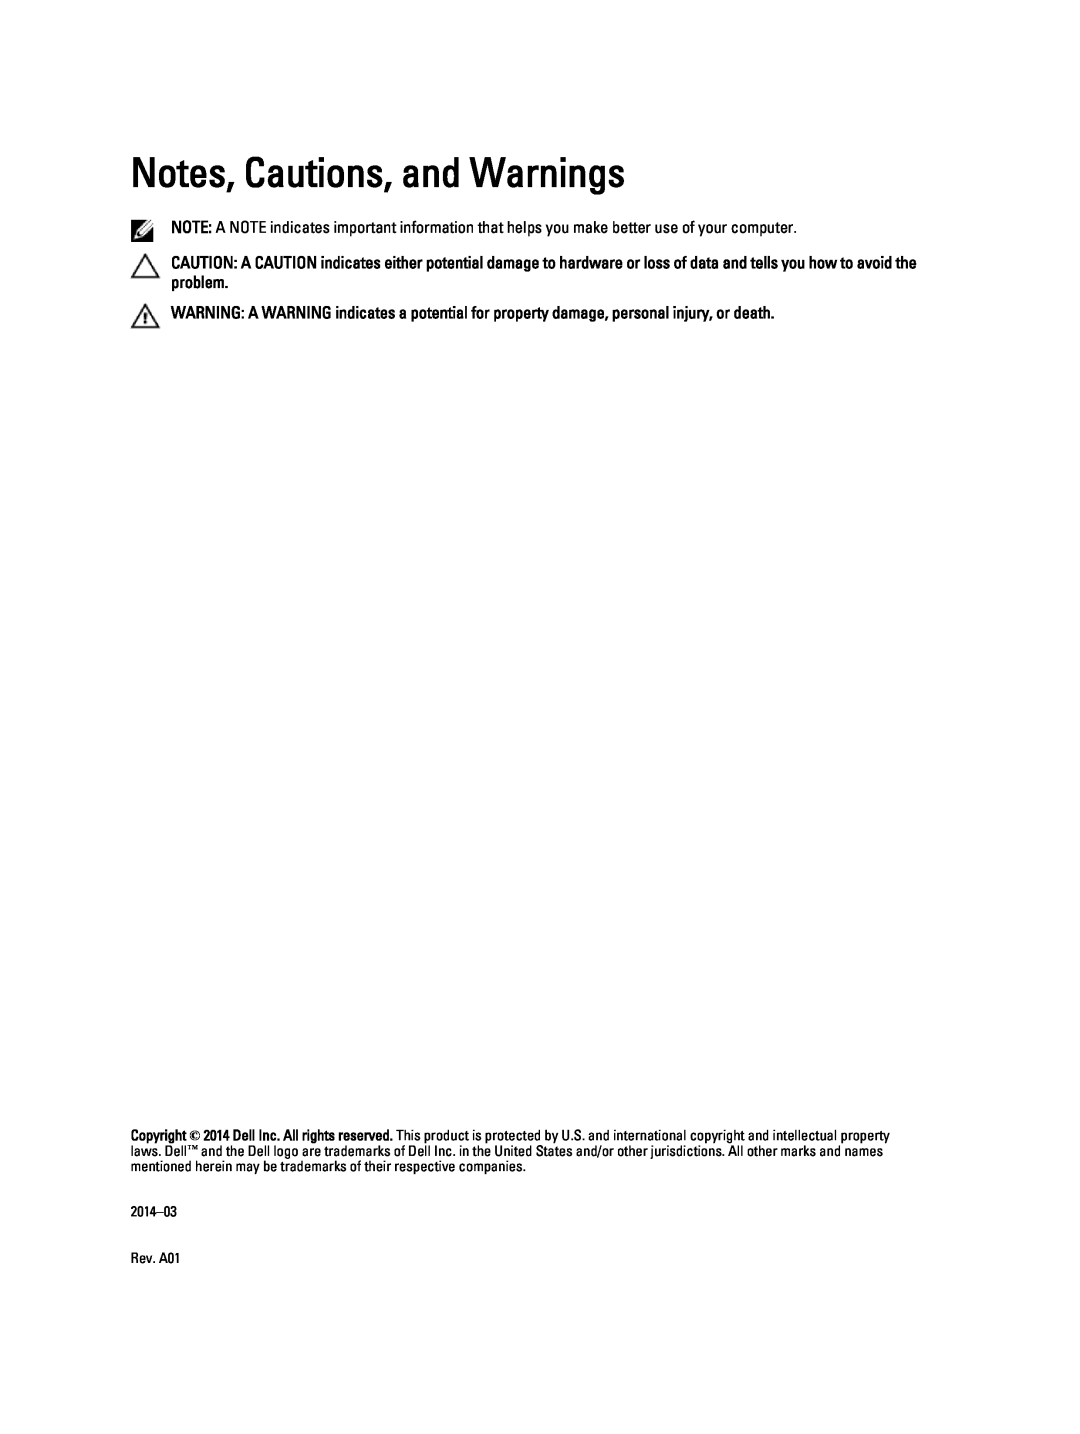 Dell T7610 owner manual Notes, Cautions, and Warnings 